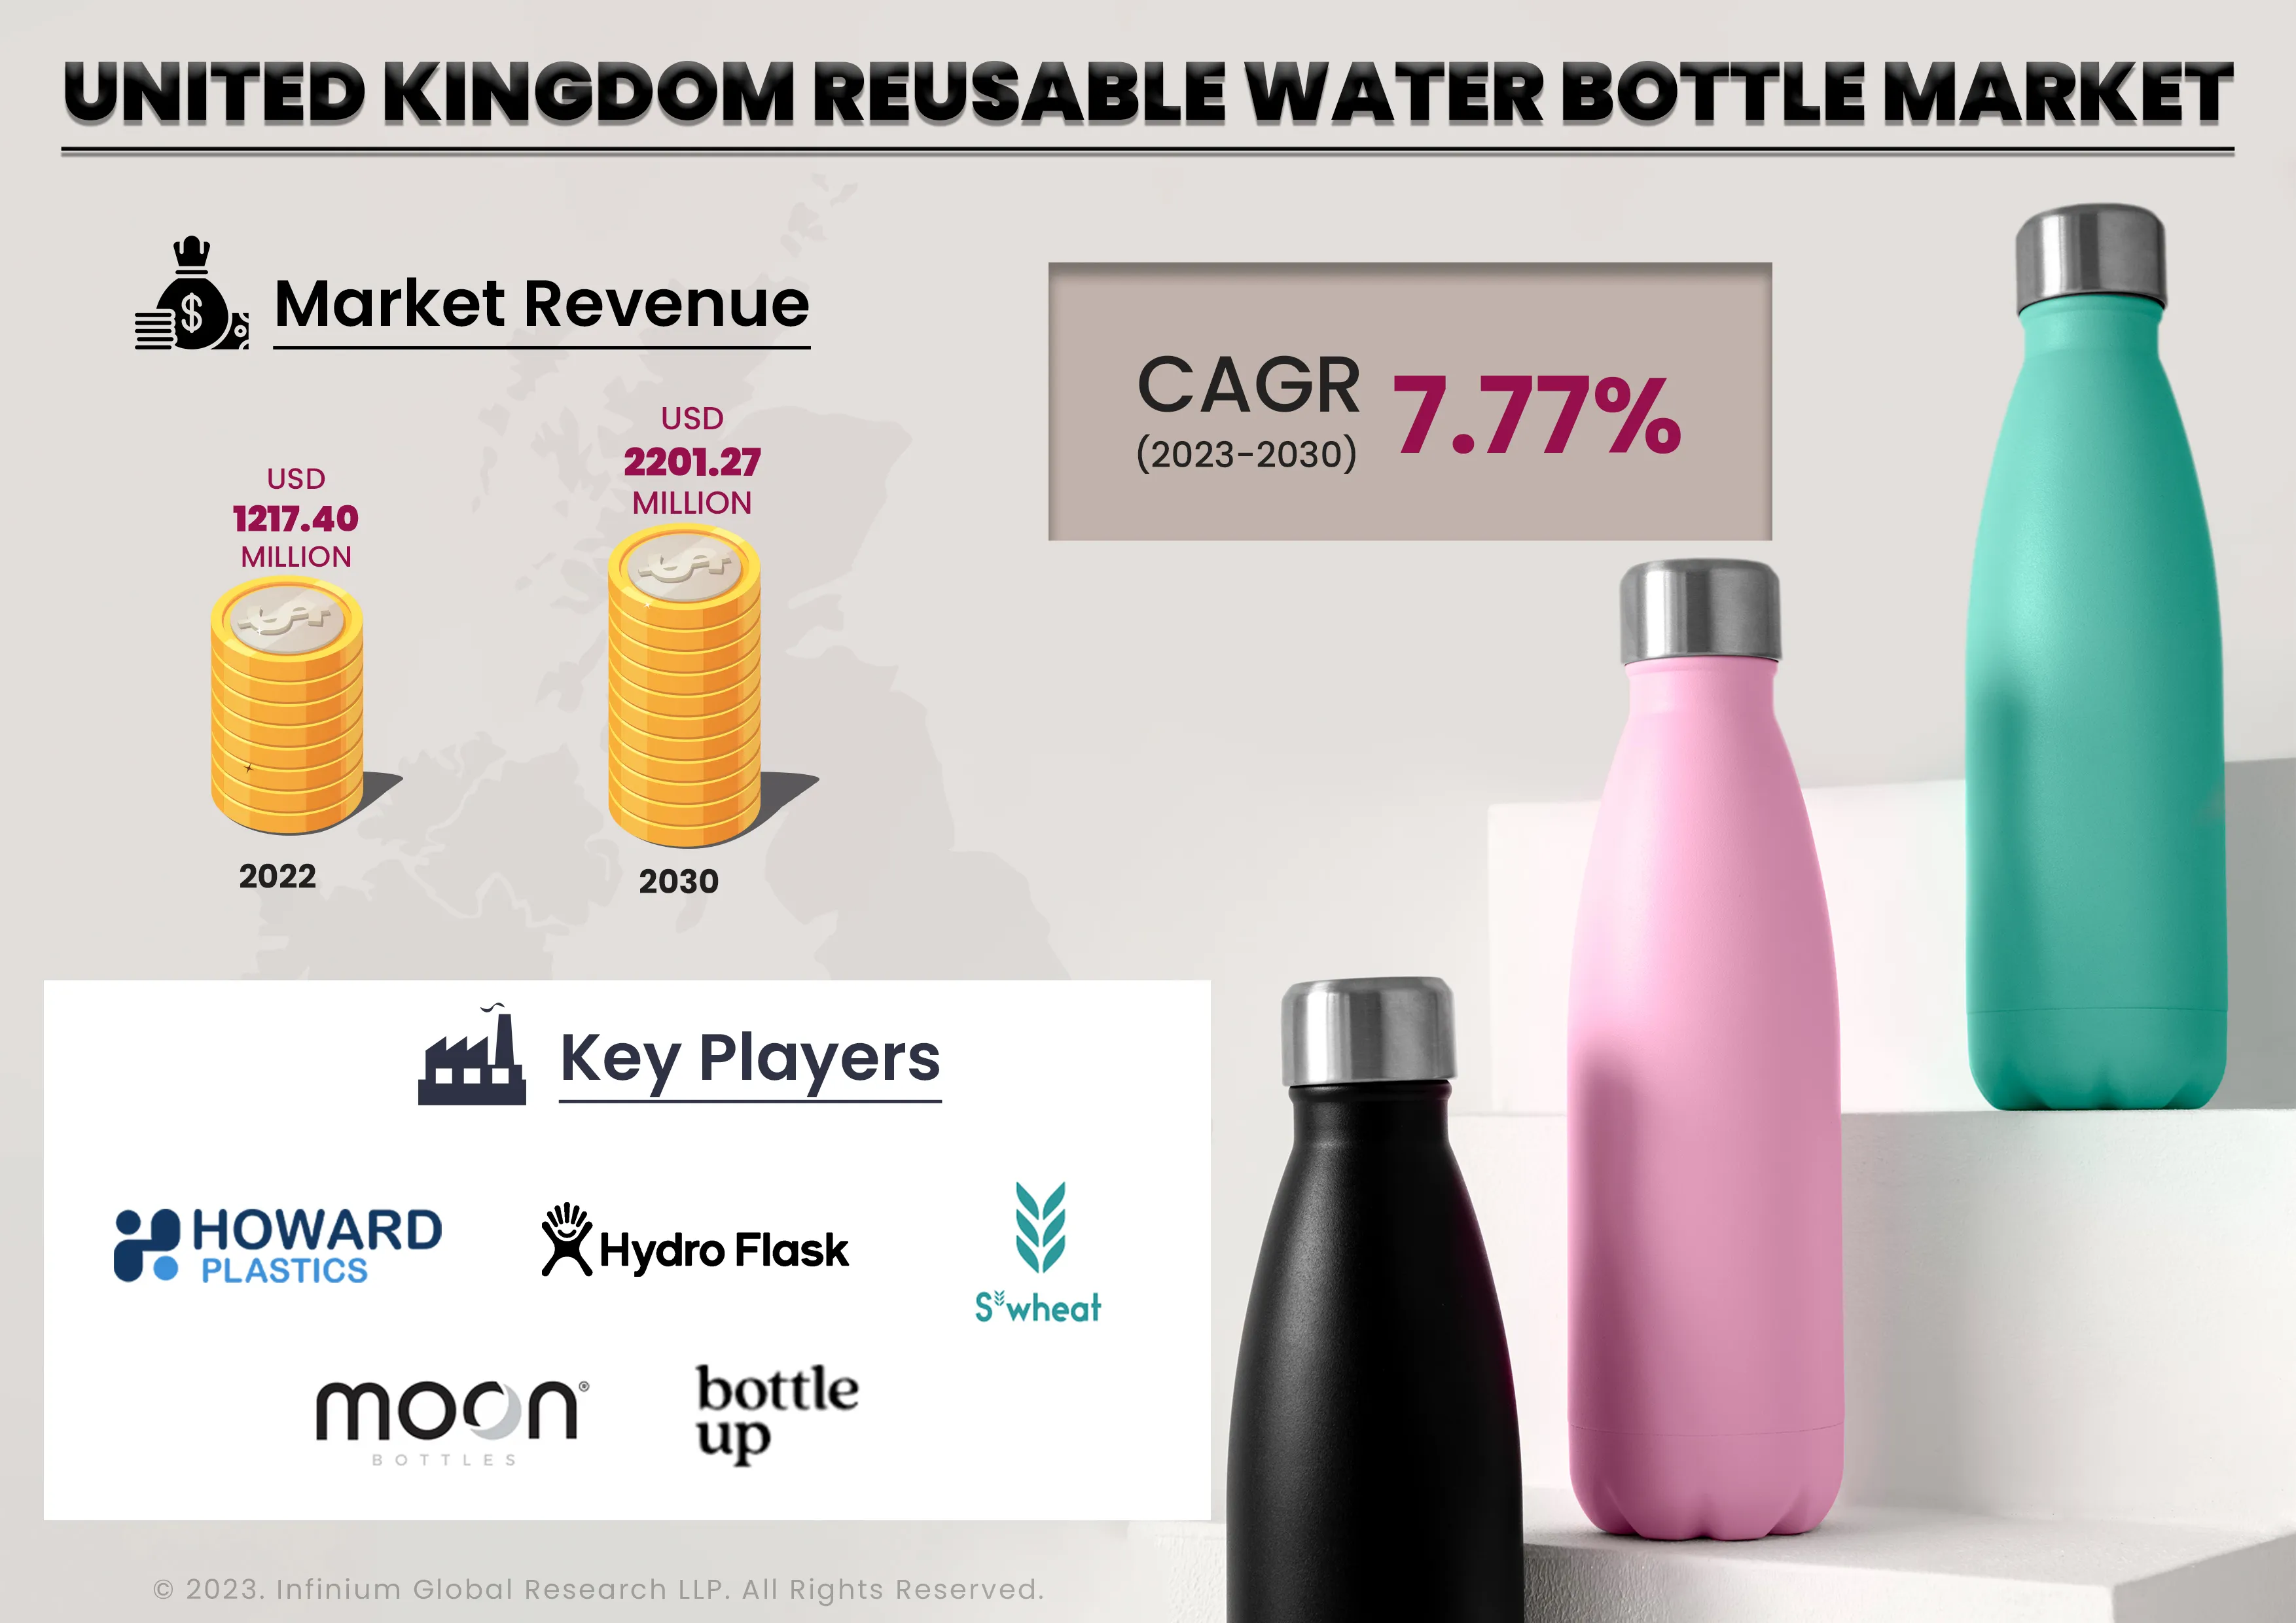 United Kingdom Reusable Water Bottle Market Was Valued at USD 1,217.40 Million in 2022 and is Expected to Reach USD 2,201.27 Million by 2030 and Grow at a CAGR of 7.77% Over the Forecast Period 2023-2030.